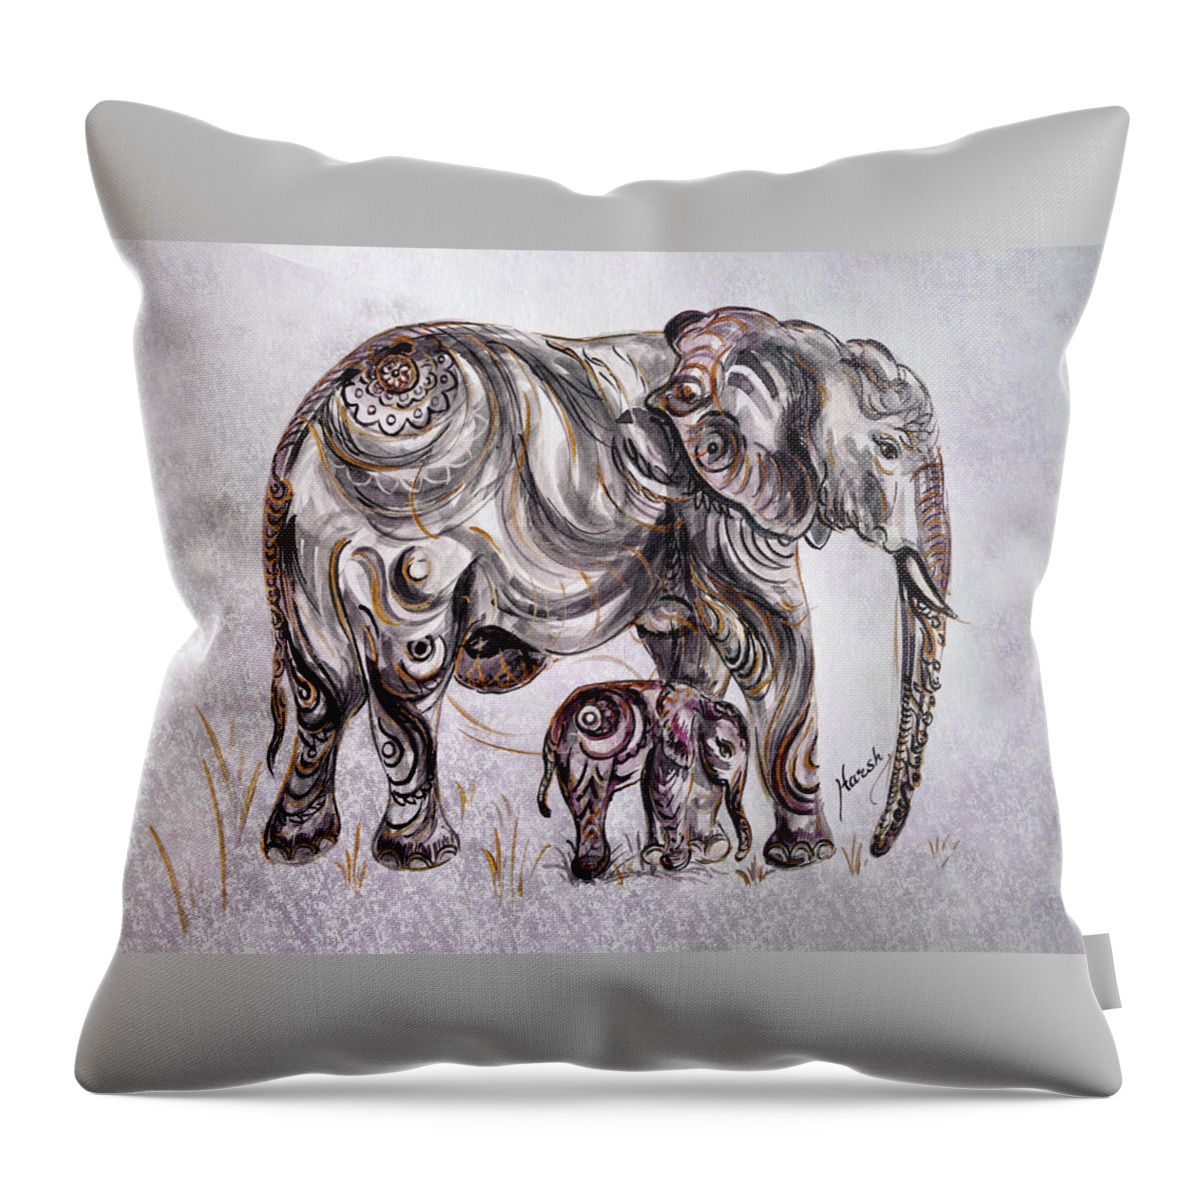 Elephant Throw Pillow featuring the painting Mother Elephant by Harsh Malik